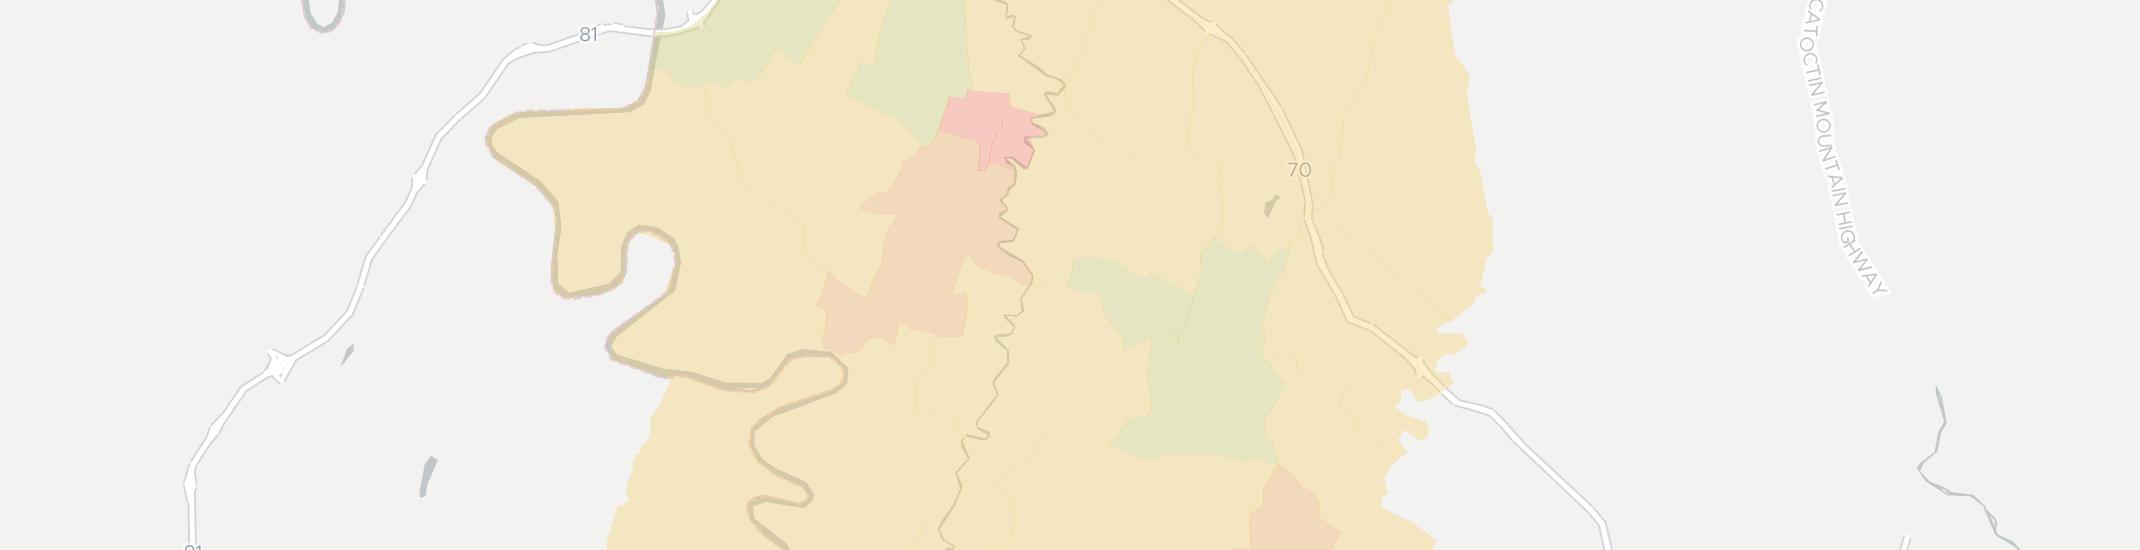 Boonsboro Internet Competition Map. Click for interactive map